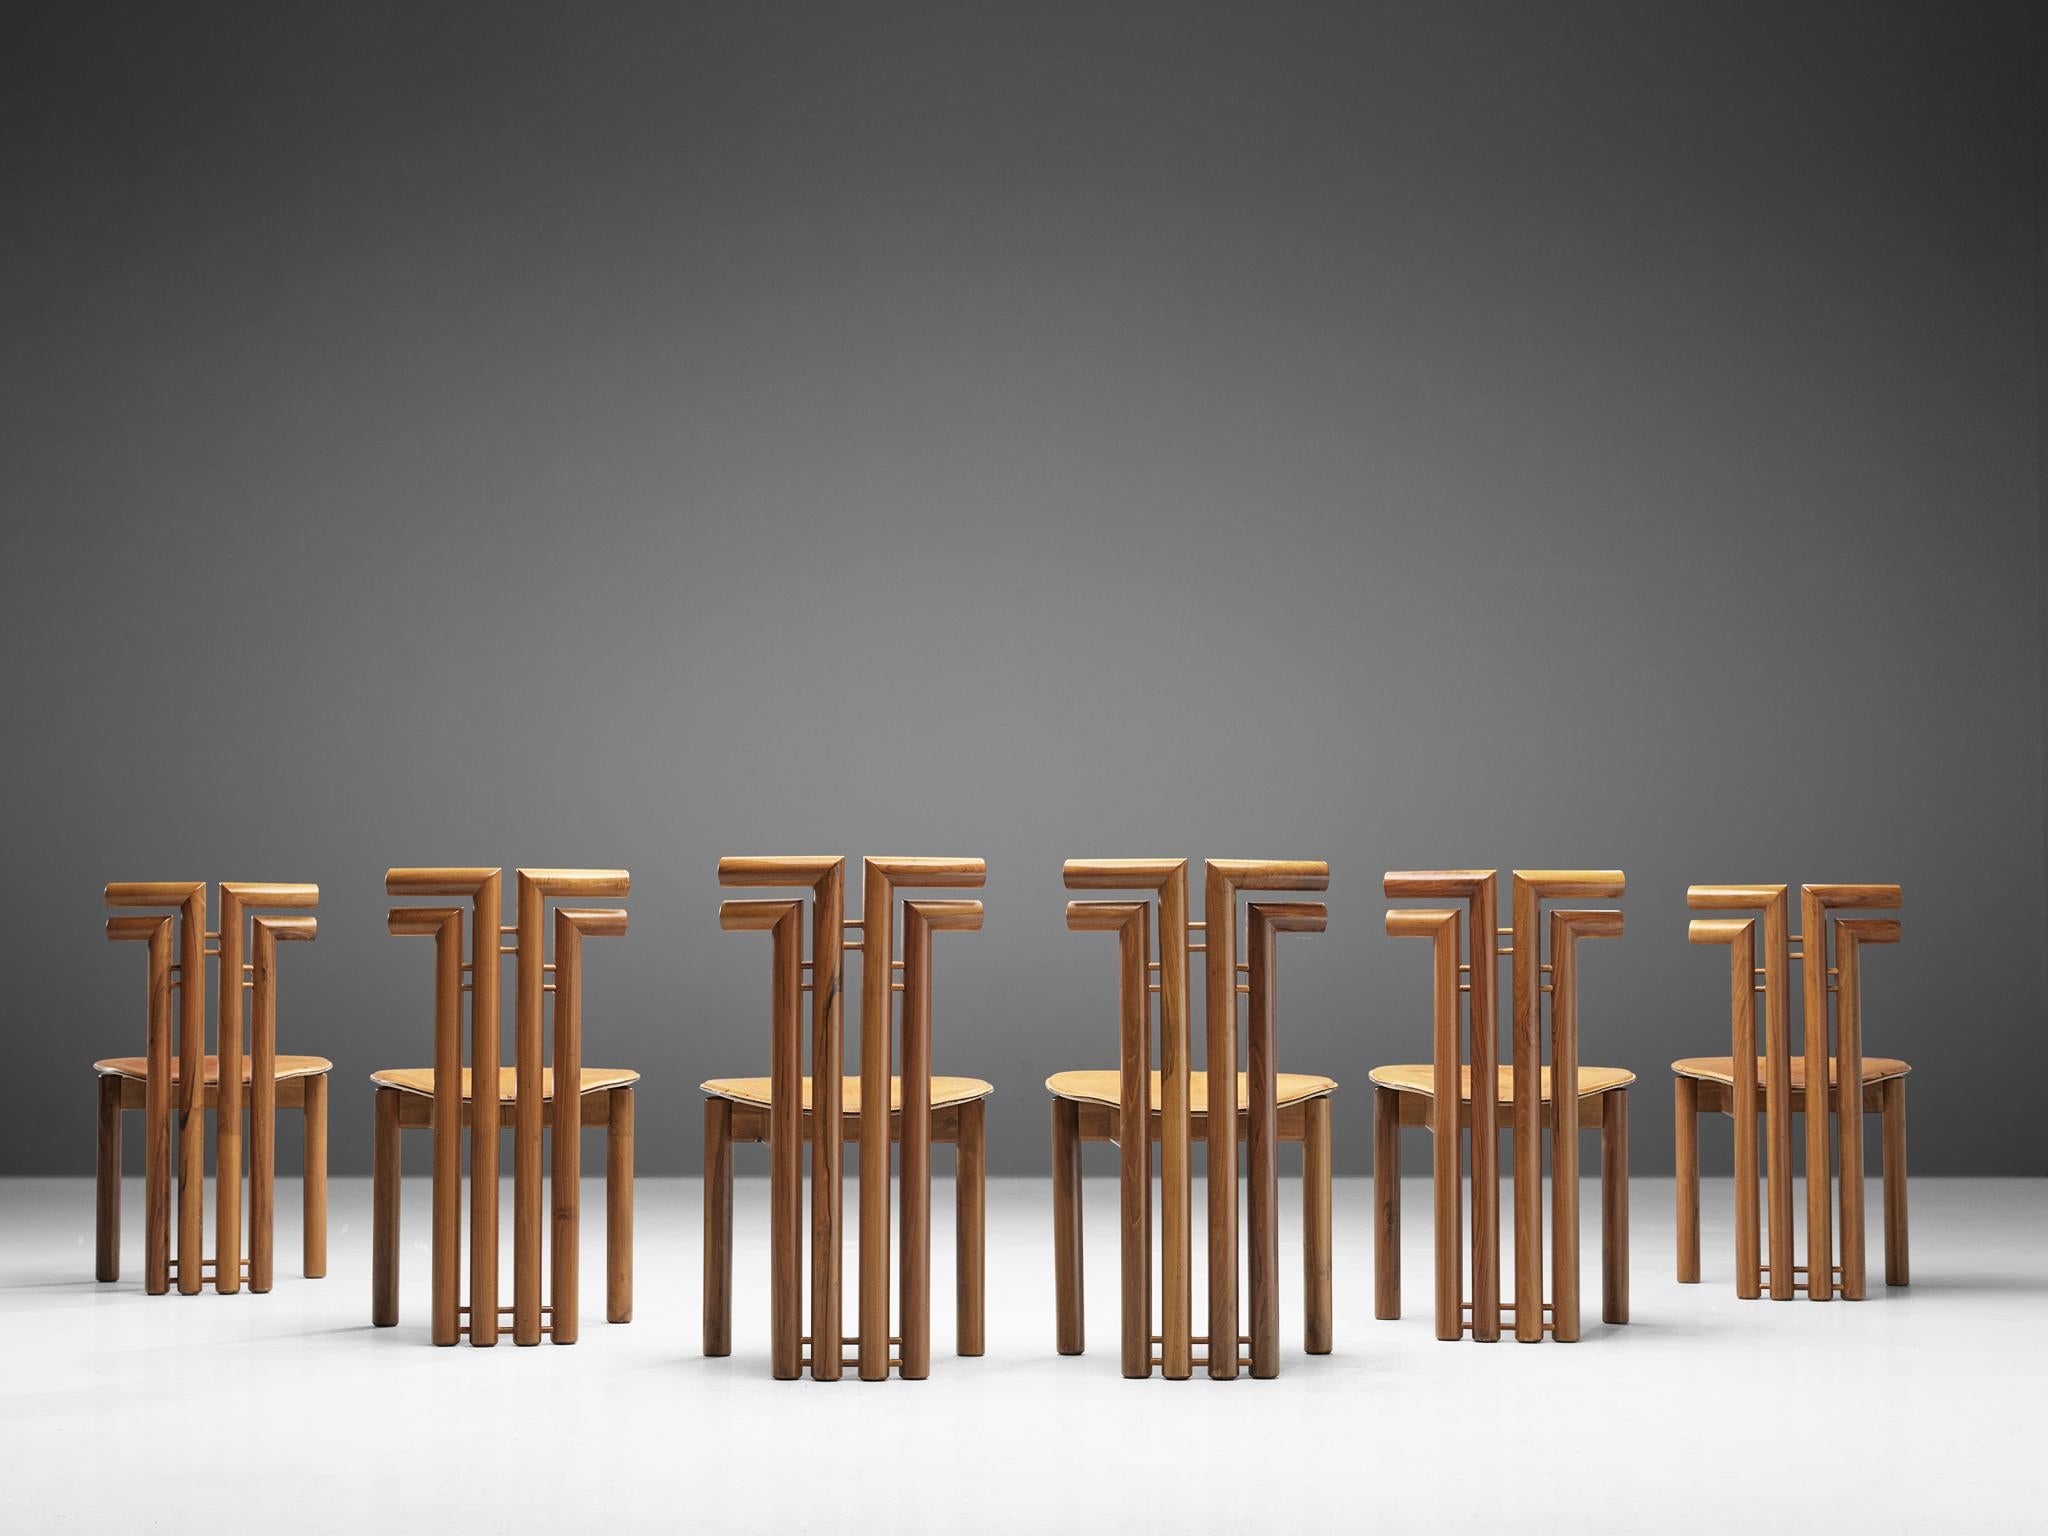 Set of dining chairs, Italian walnut and cognac leather, Italy, 1970s.

Set of six sculptural chairs that feature wonderful backrests, consisting of four round pillar like chair legs that fan out to the side, which creates a sculptural appearance.